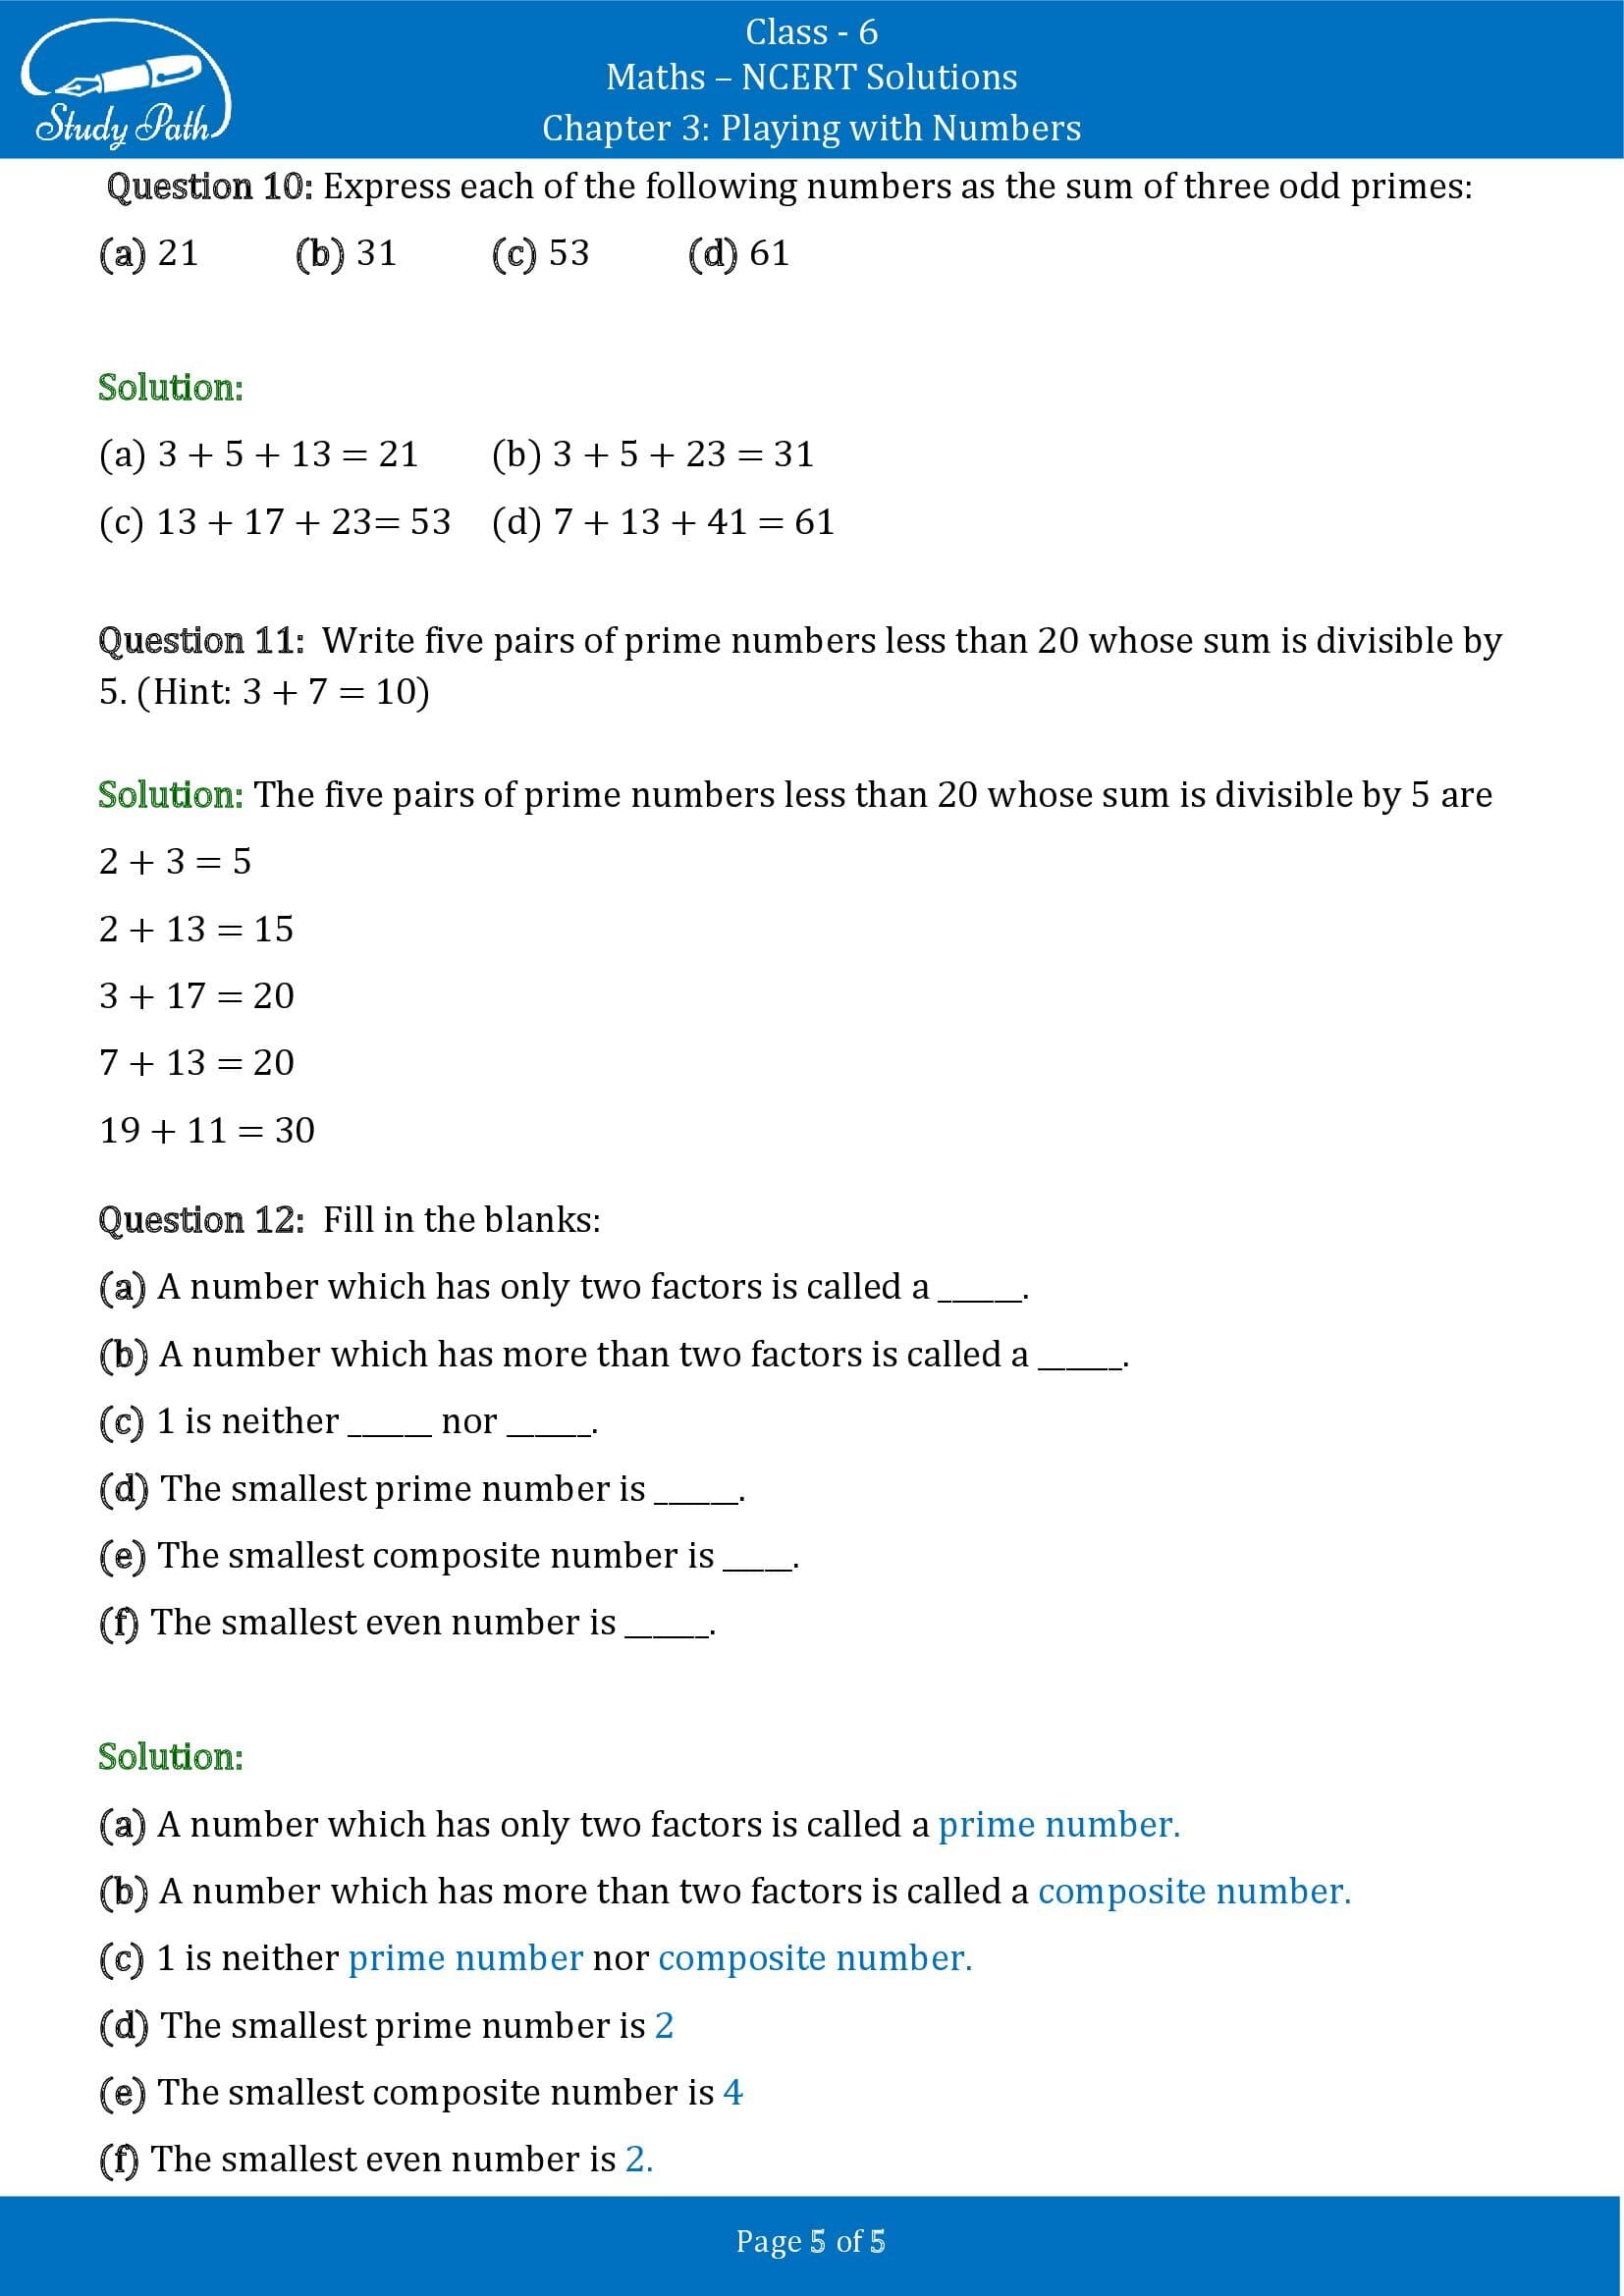 NCERT Solutions for Class 6 Maths Chapter 3 Playing with Numbers Exercise 3.2 00005